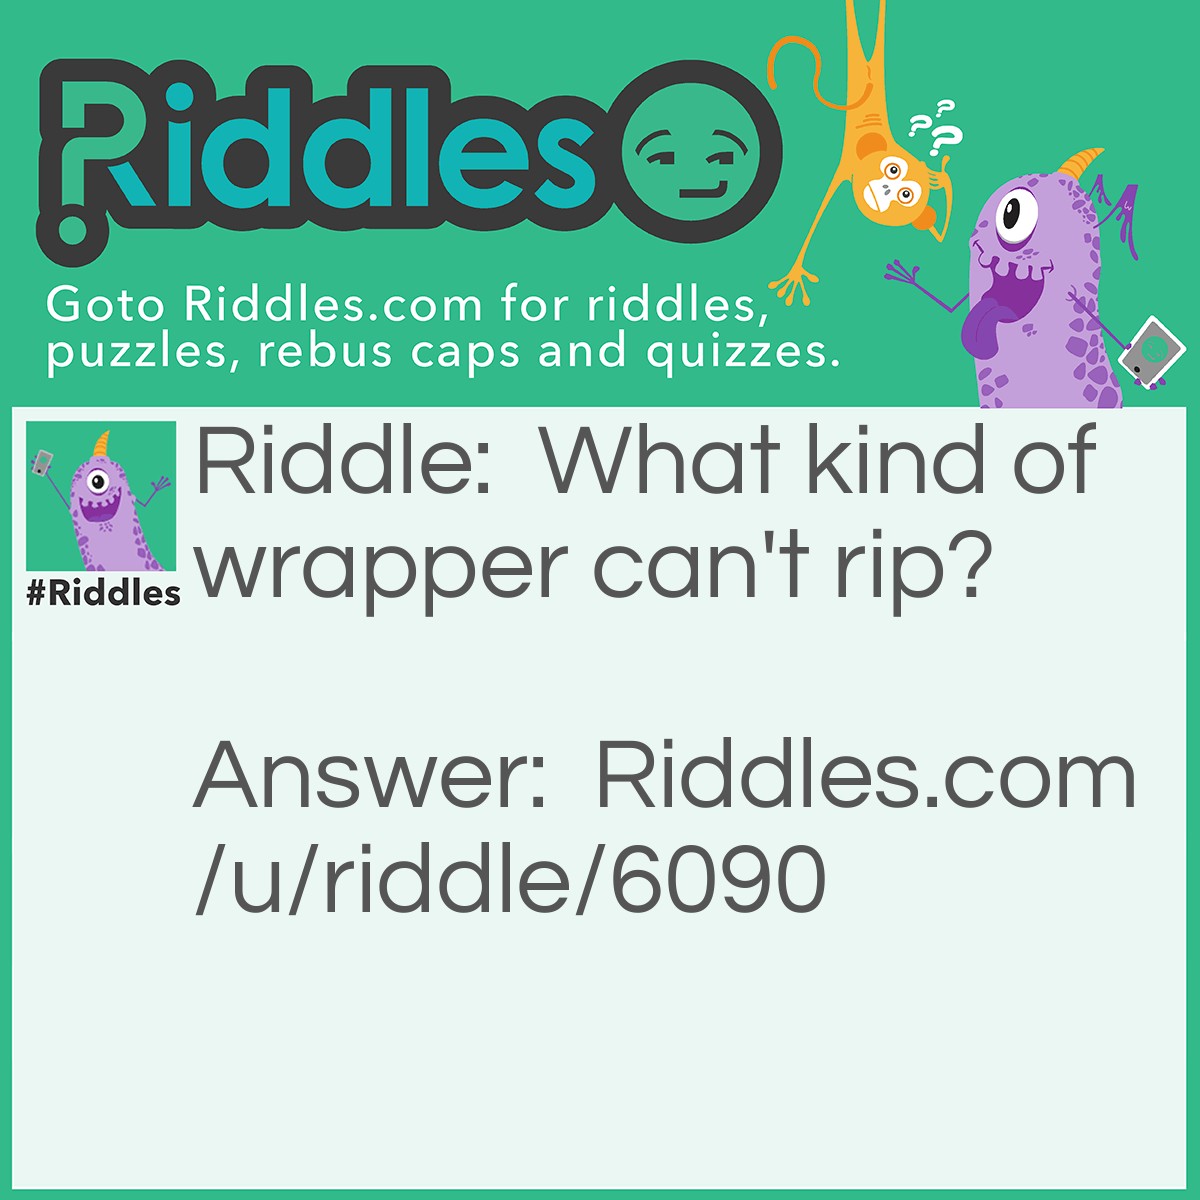 Riddle: What kind of wrapper can't rip? Answer: A rapper.